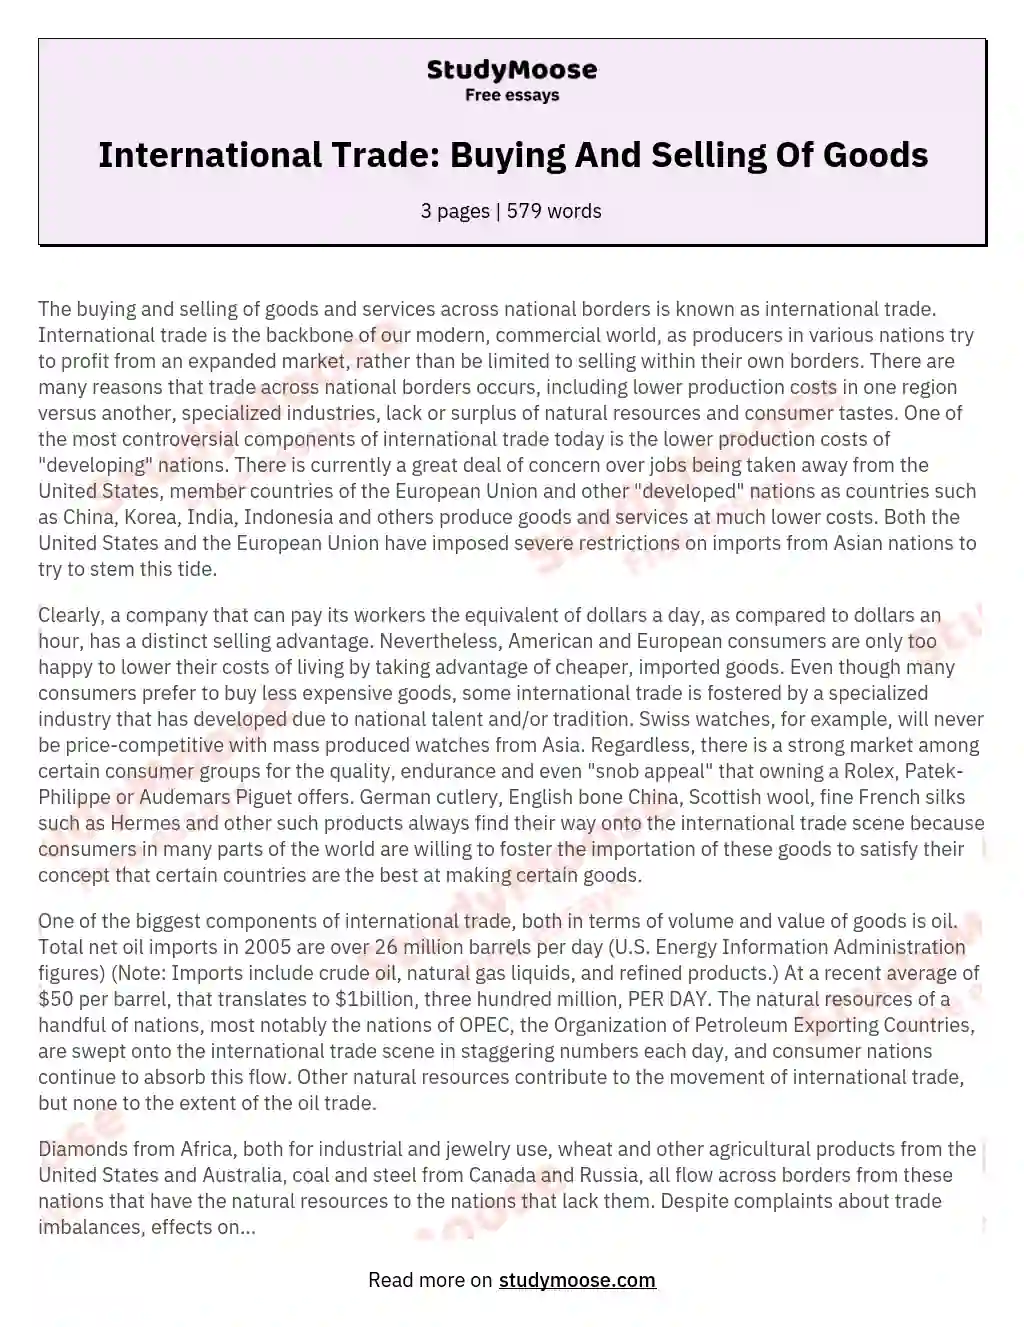 International Trade: Buying And Selling Of Goods essay